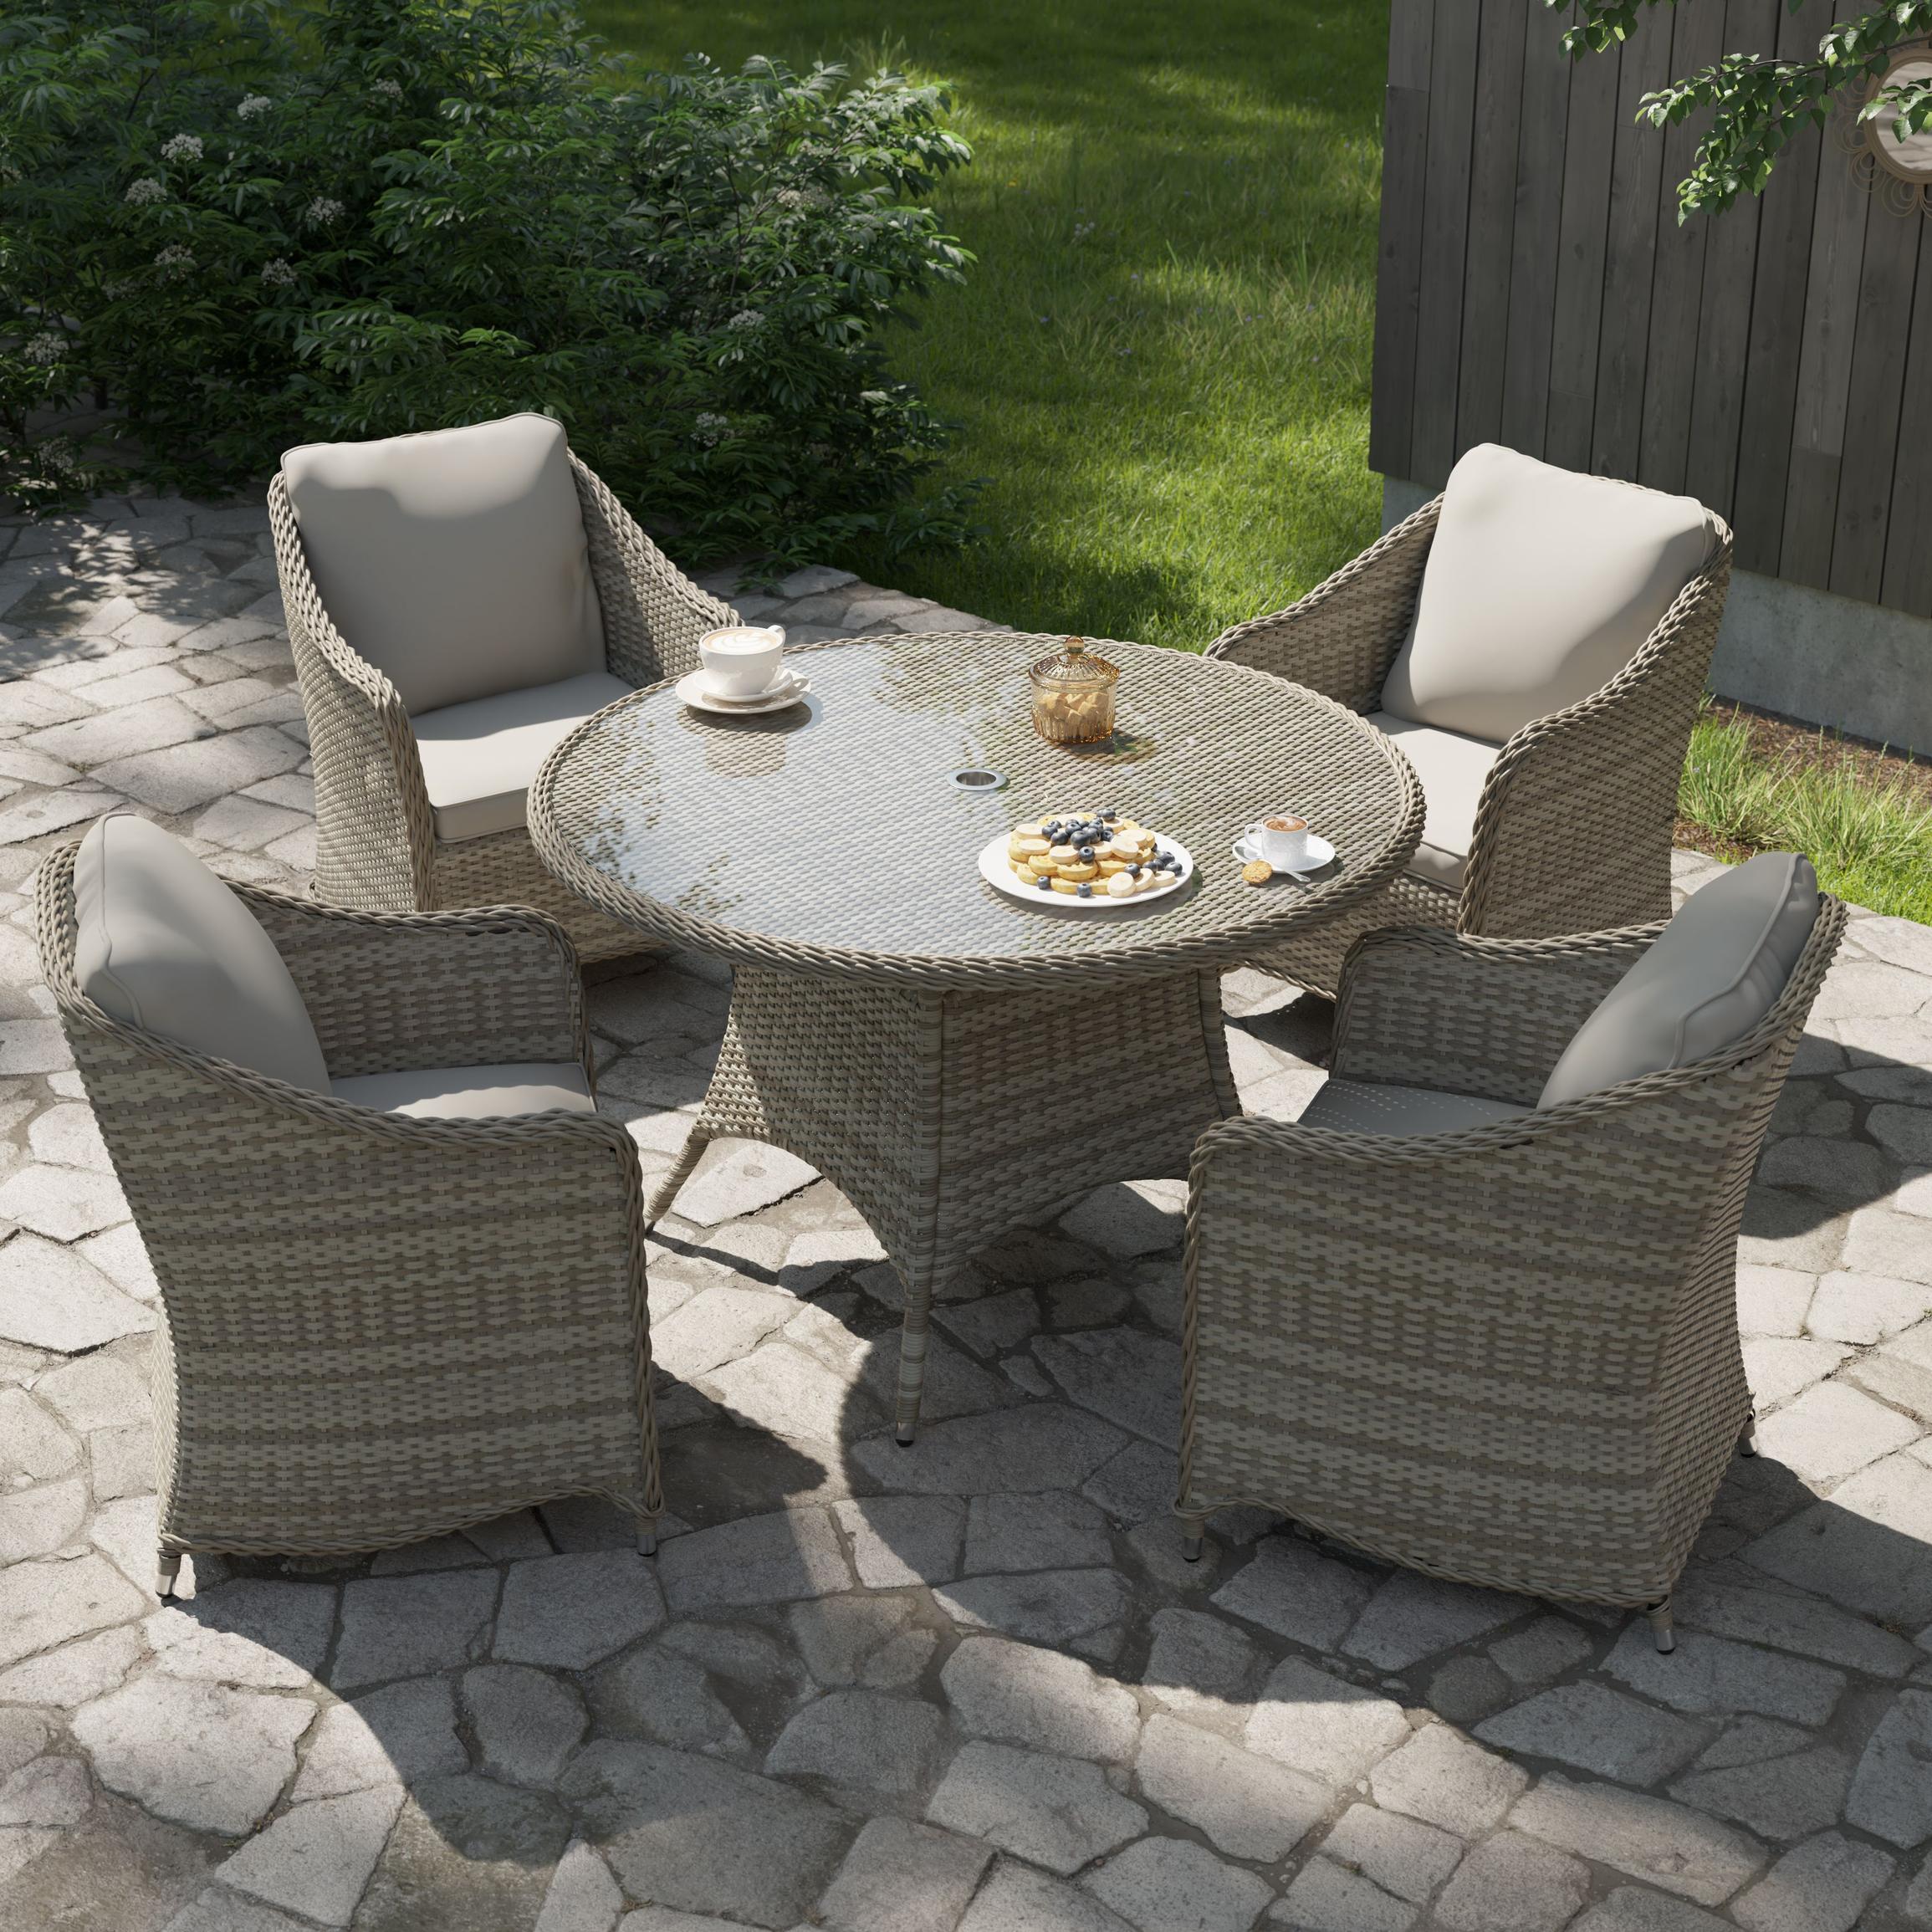 GoodHome Hamilton Cappuccino Rattan effect 4 seater Dining set offers at £825 in B&Q